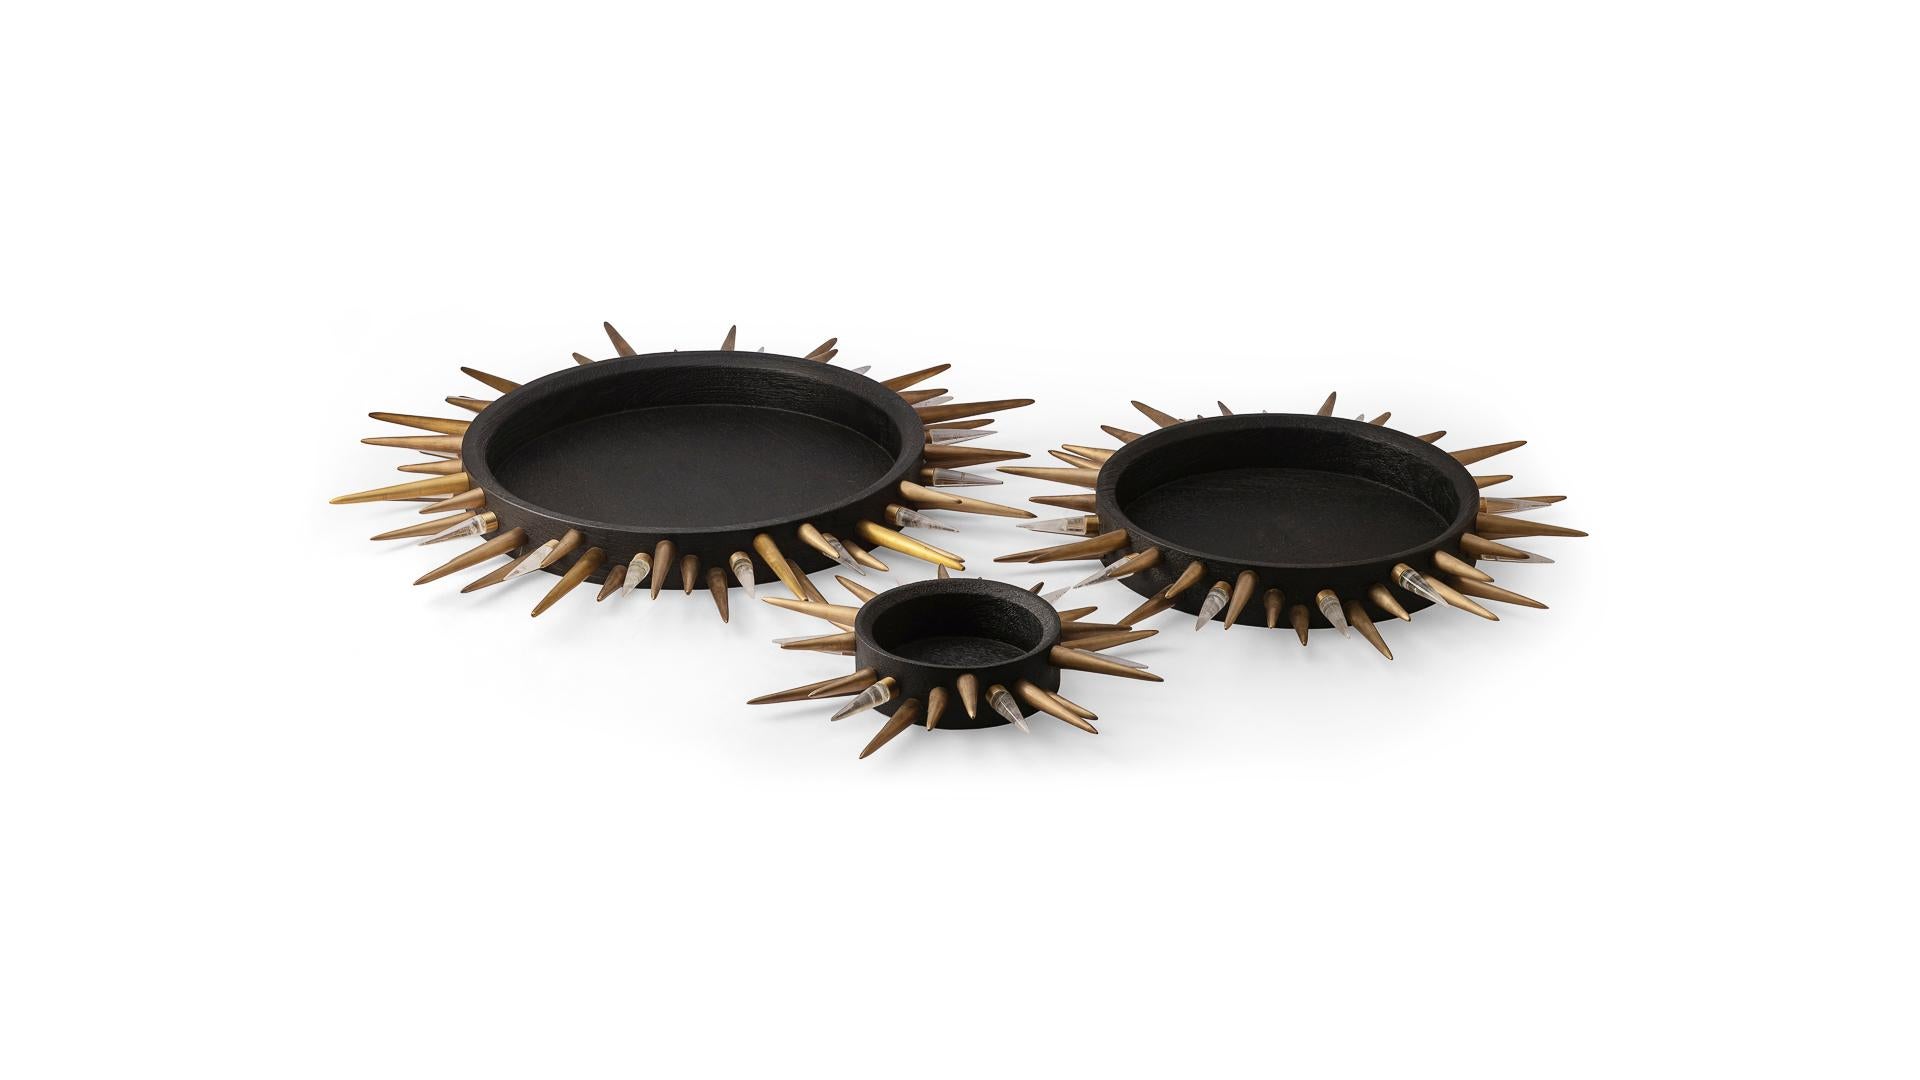 American Piton Tray, Large Charred Oak Tray with Brass and Quartz Spikes For Sale